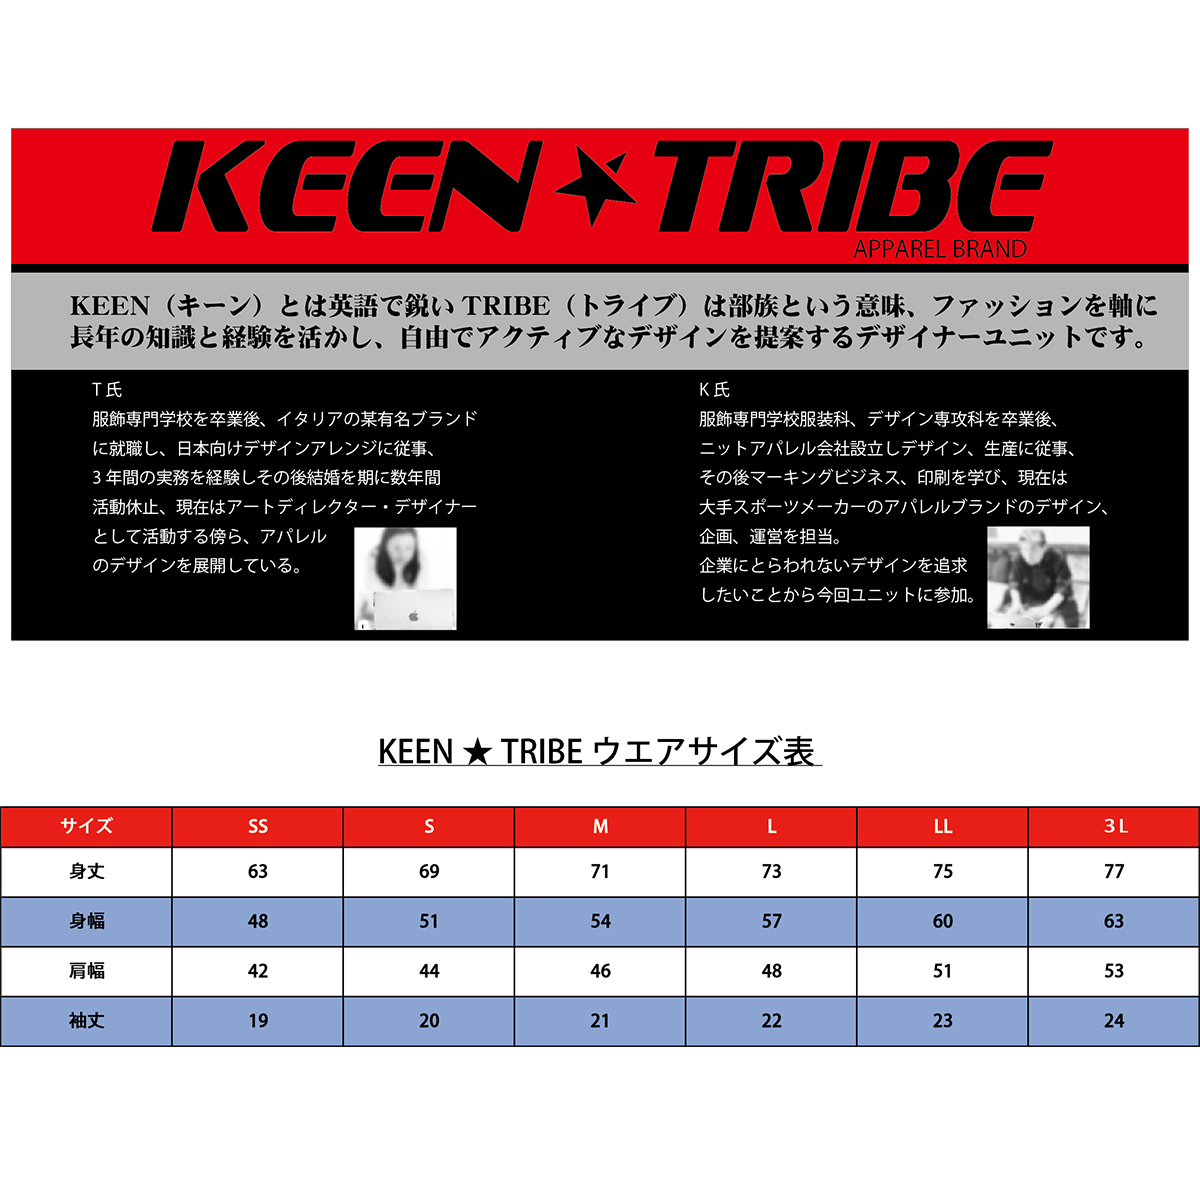 KEEN ★ TRIBE　KT-6(受注生産)